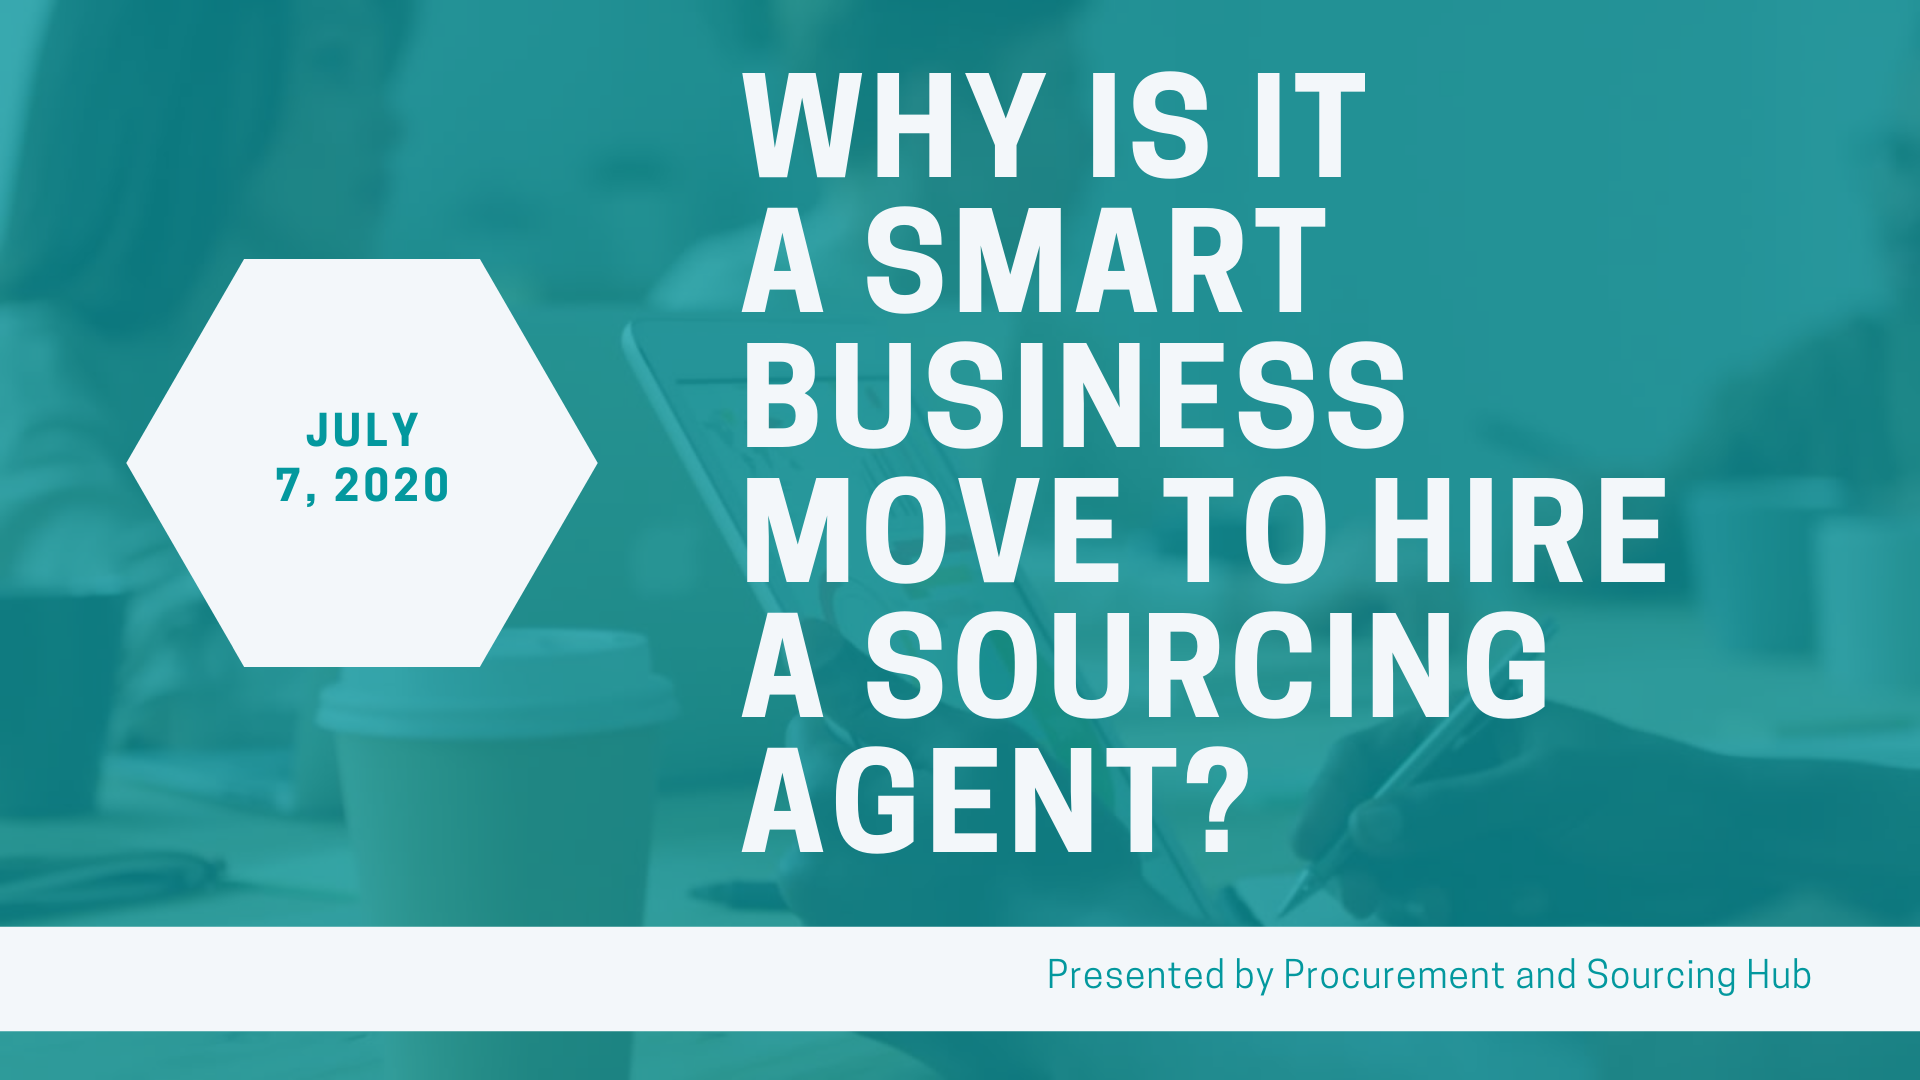 Why is it a Smart Business Move to Hire a Sourcing Agent?